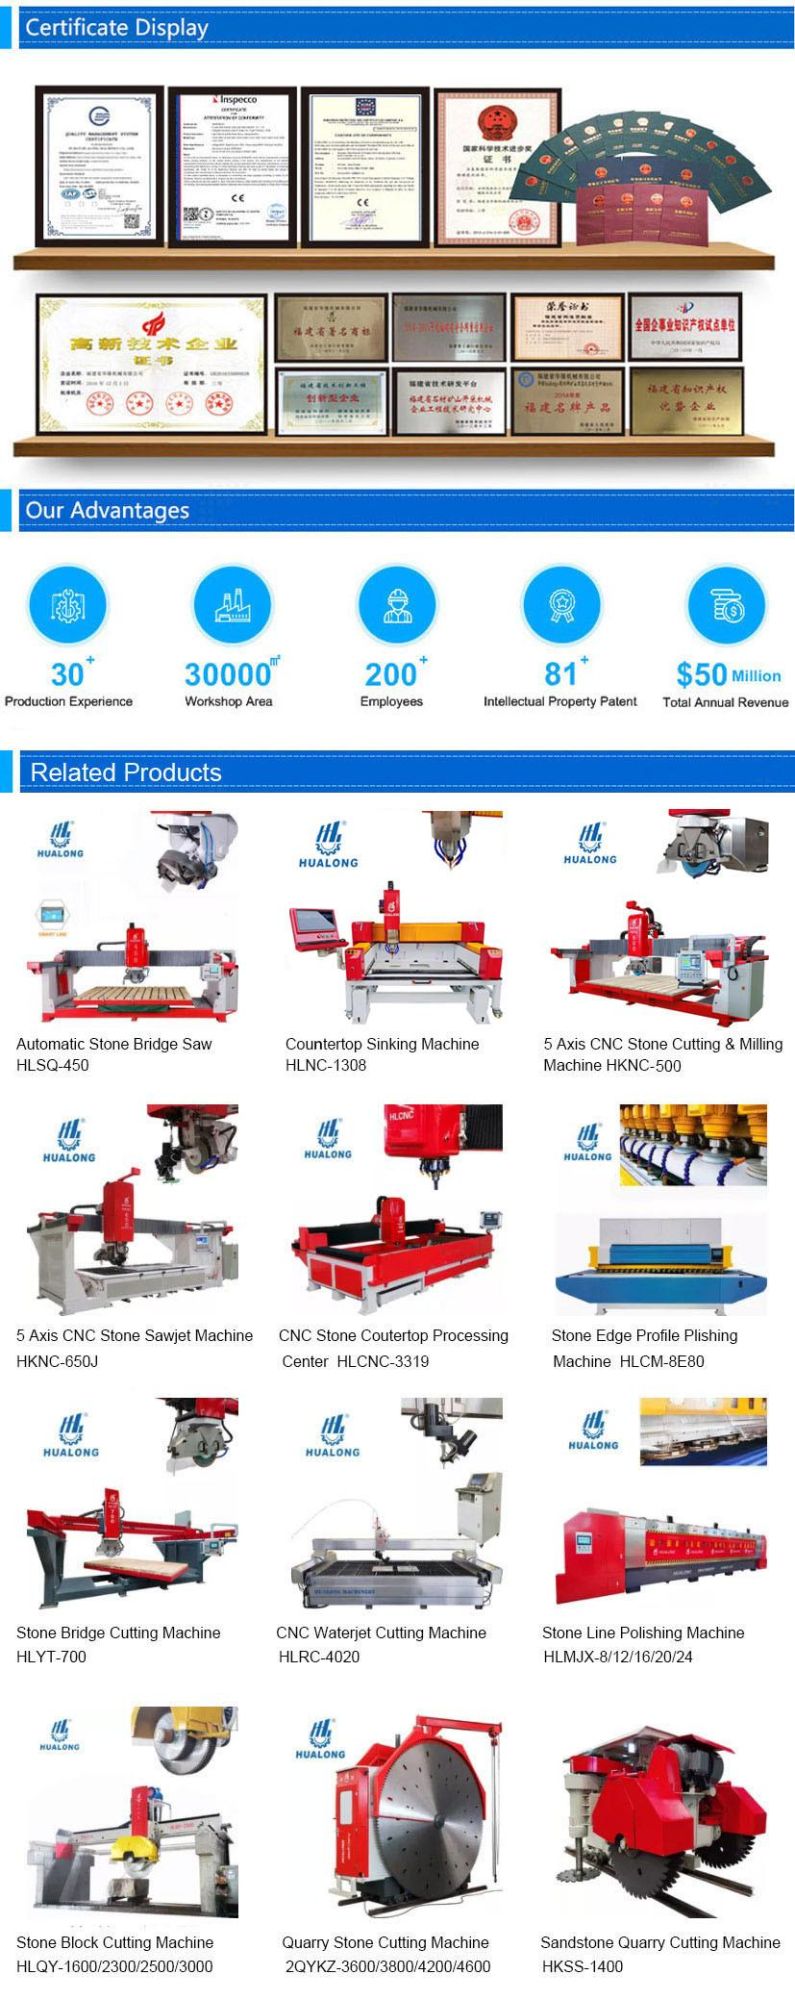 Hualong Stone Machinery 5 Axis CNC Waterjet with Weihong System Glass Cutting Machine Metal Cutter Stone Countertop Tile Making Price